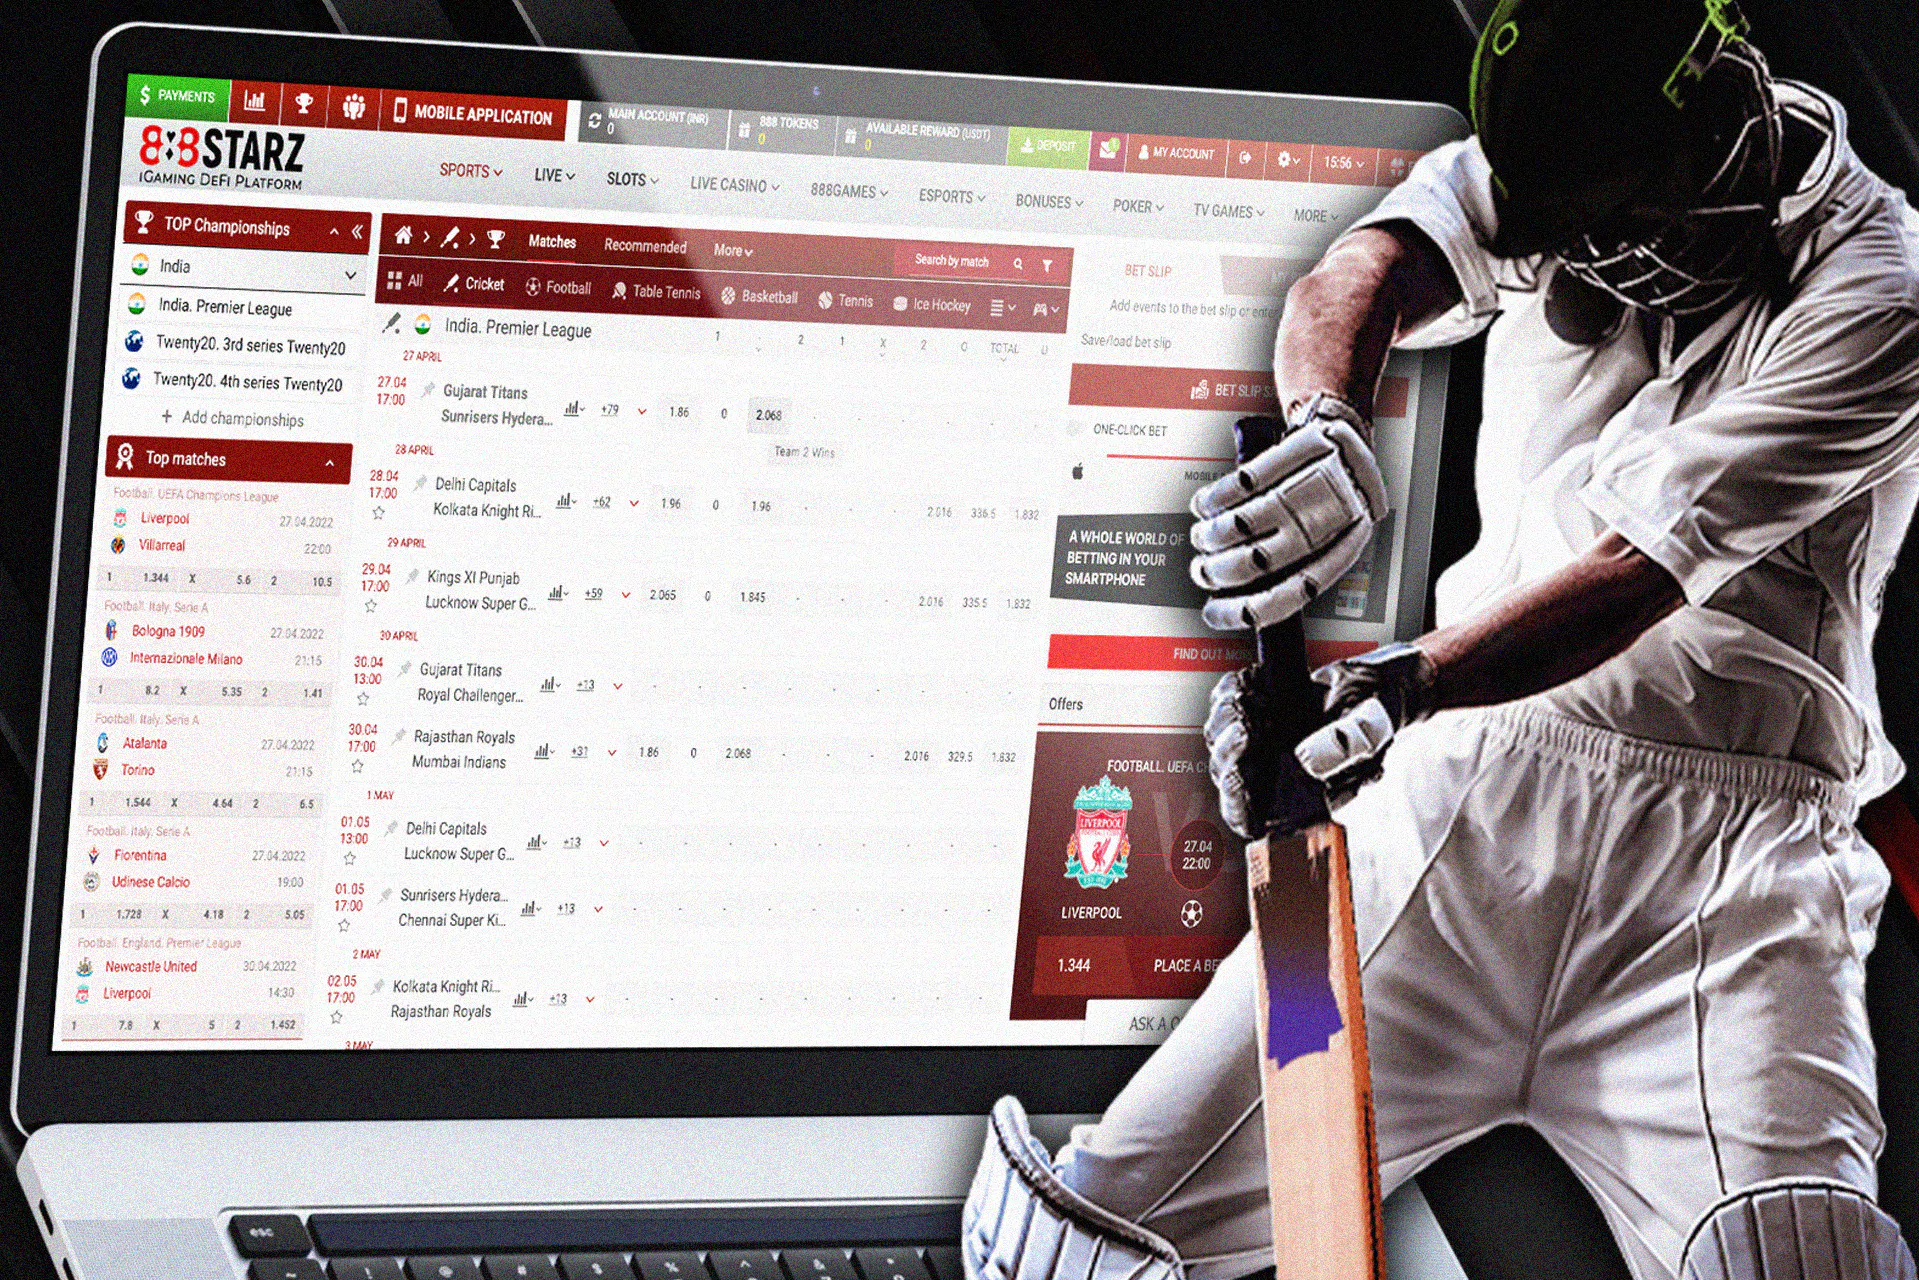 888starz has a wide range of cricket mathces and leagues.